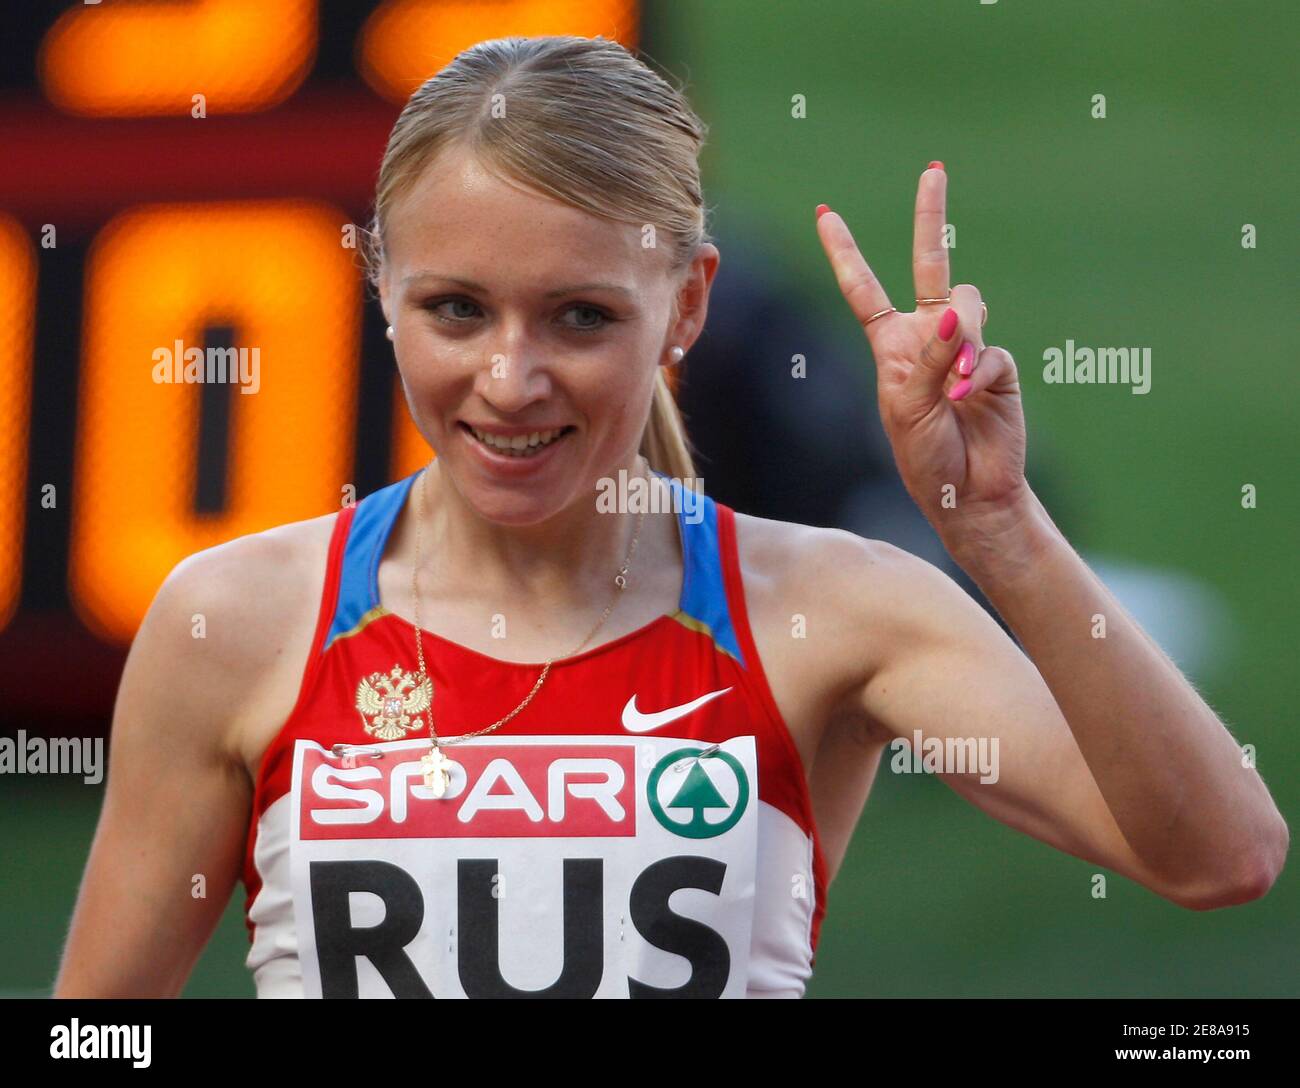 Russia's Anna Alminova celebrates her victory in the 1500 meters at the European  Team Championship in Leiria city stadium in Portugal June 21, 2009.  REUTERS/Jose Manuel Ribeiro (PORTUGAL SPORT ATHLETICS Stock Photo - Alamy